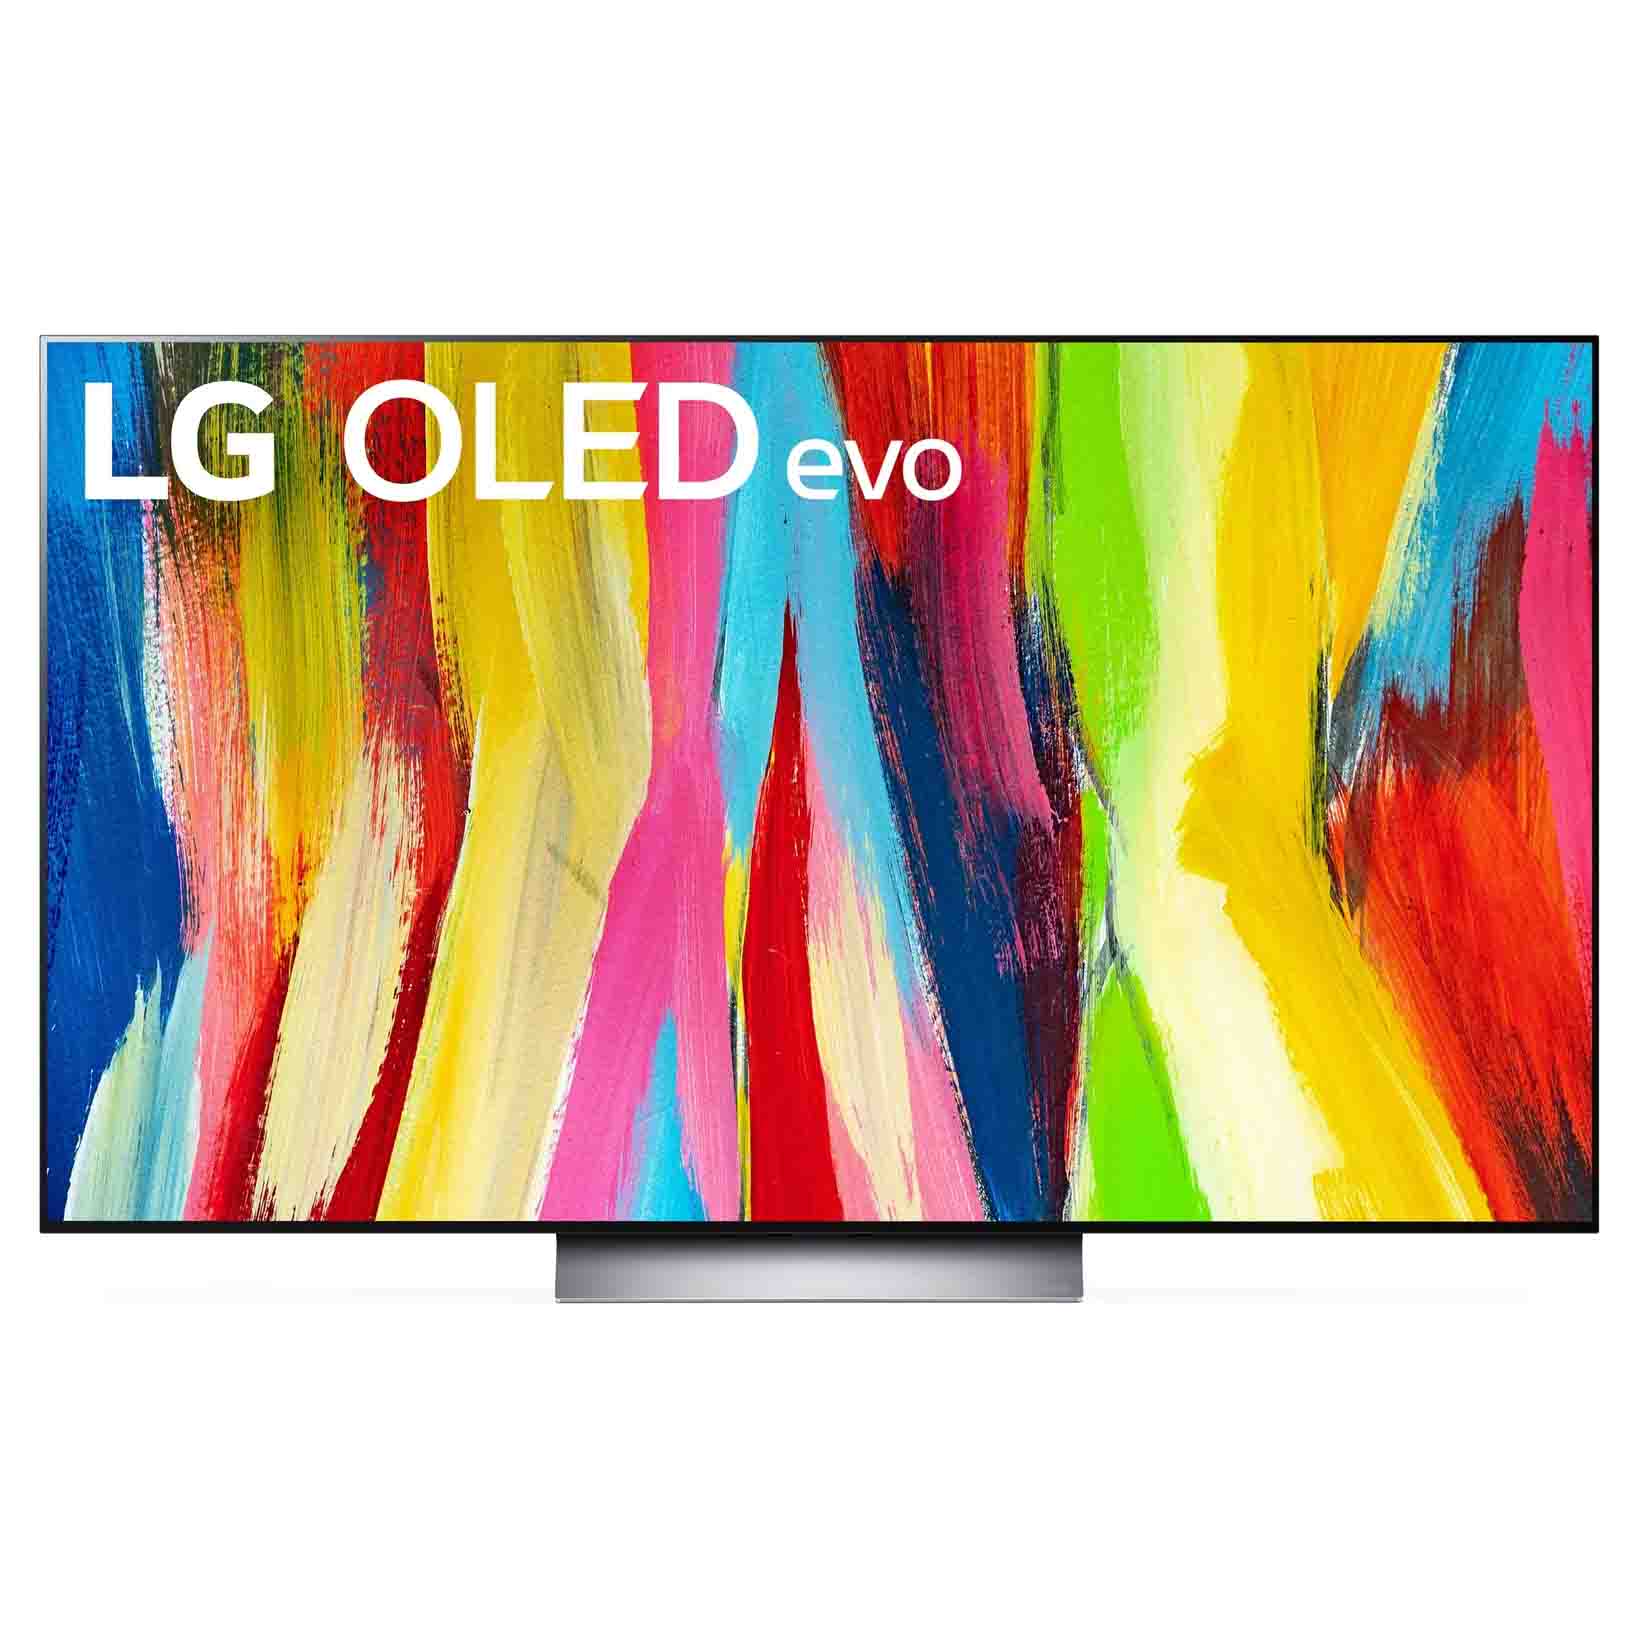 the LG C2 Series 55-Inch Class OLED evo Smart TV in black with a multicolour screensaver